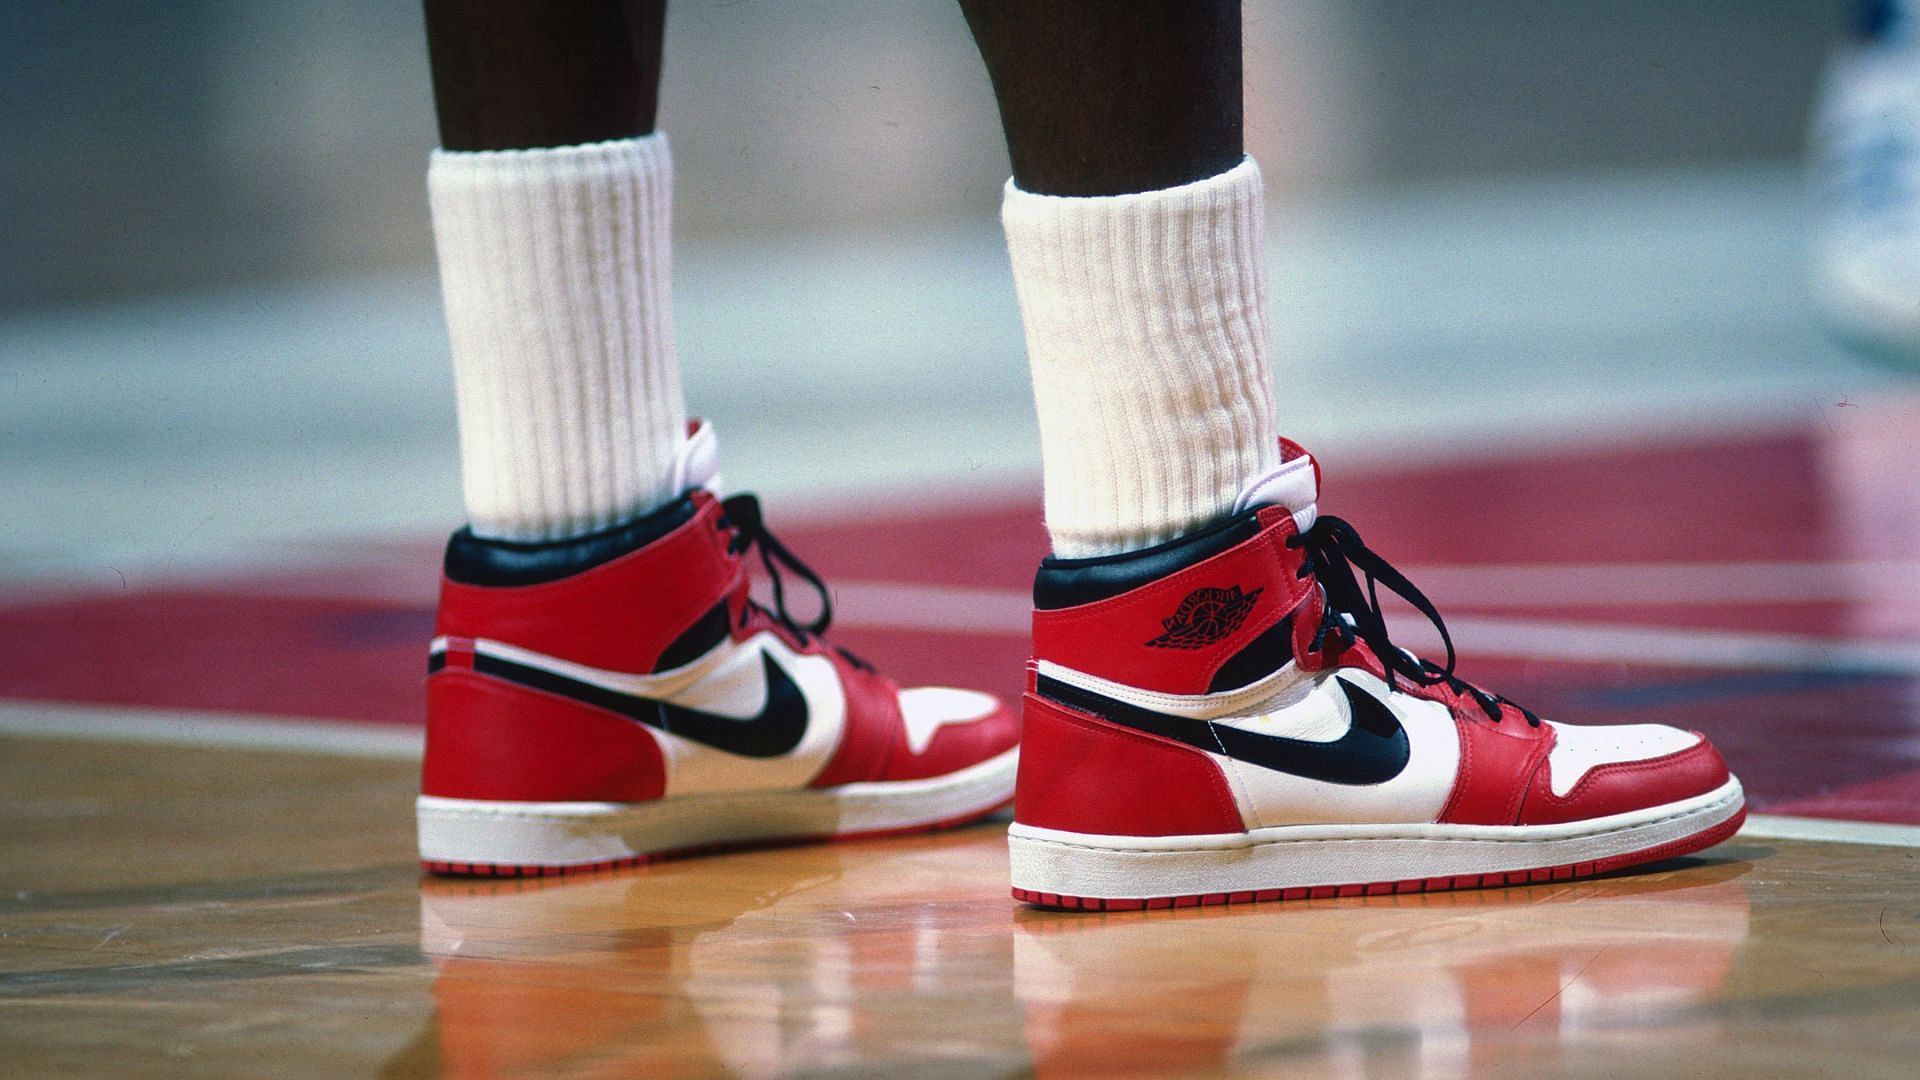 The role of Michael Jordan's shoes brand “Air Jordan” in the rise of Nike as a shoe giant